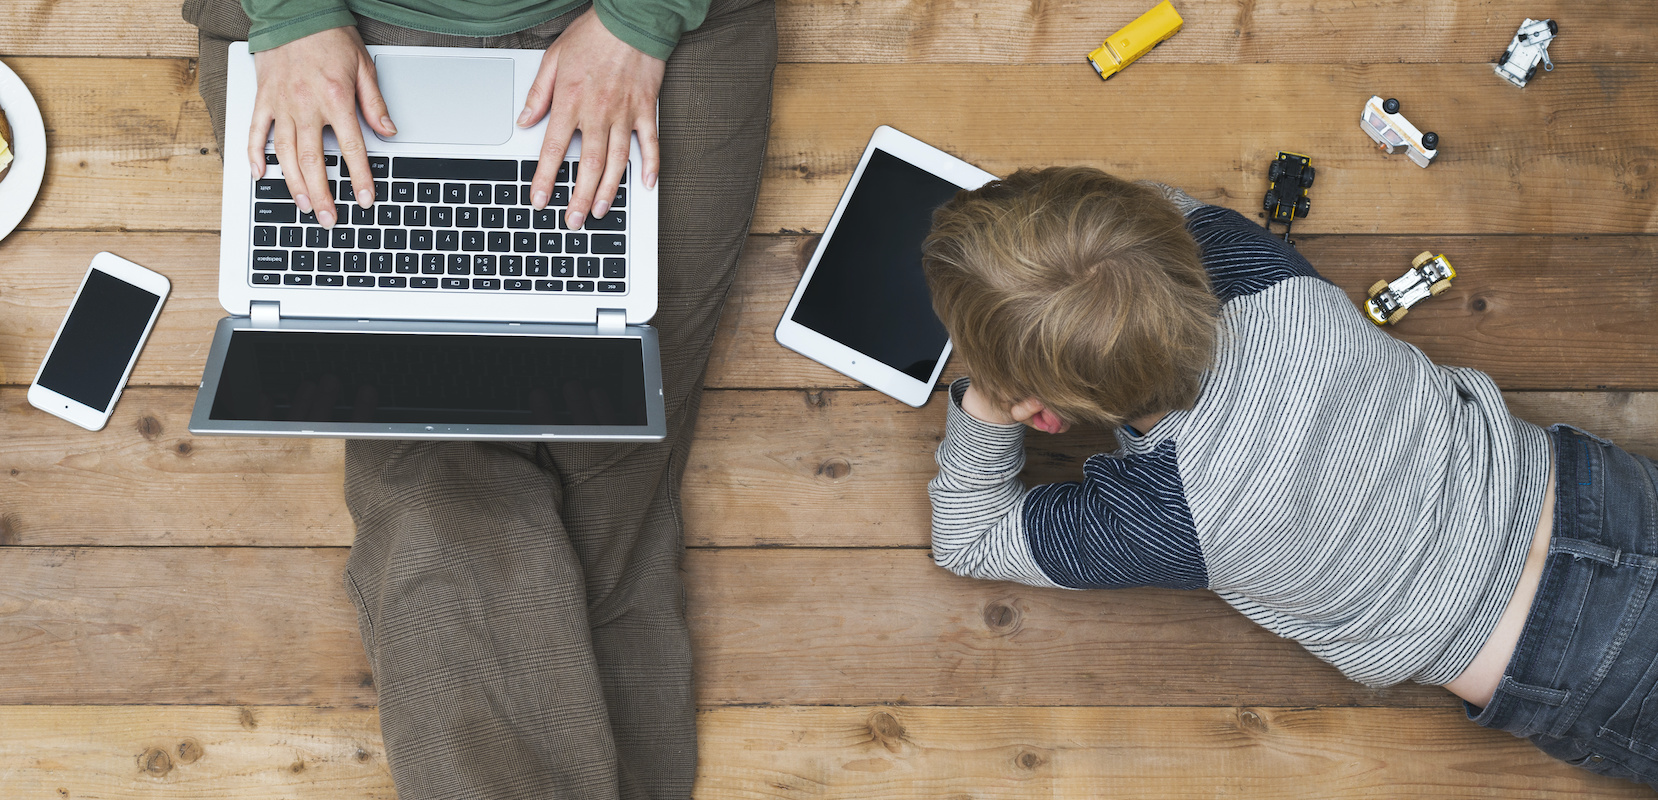 Keeping your kids safe online in the age of COVID: Usable tips for parents